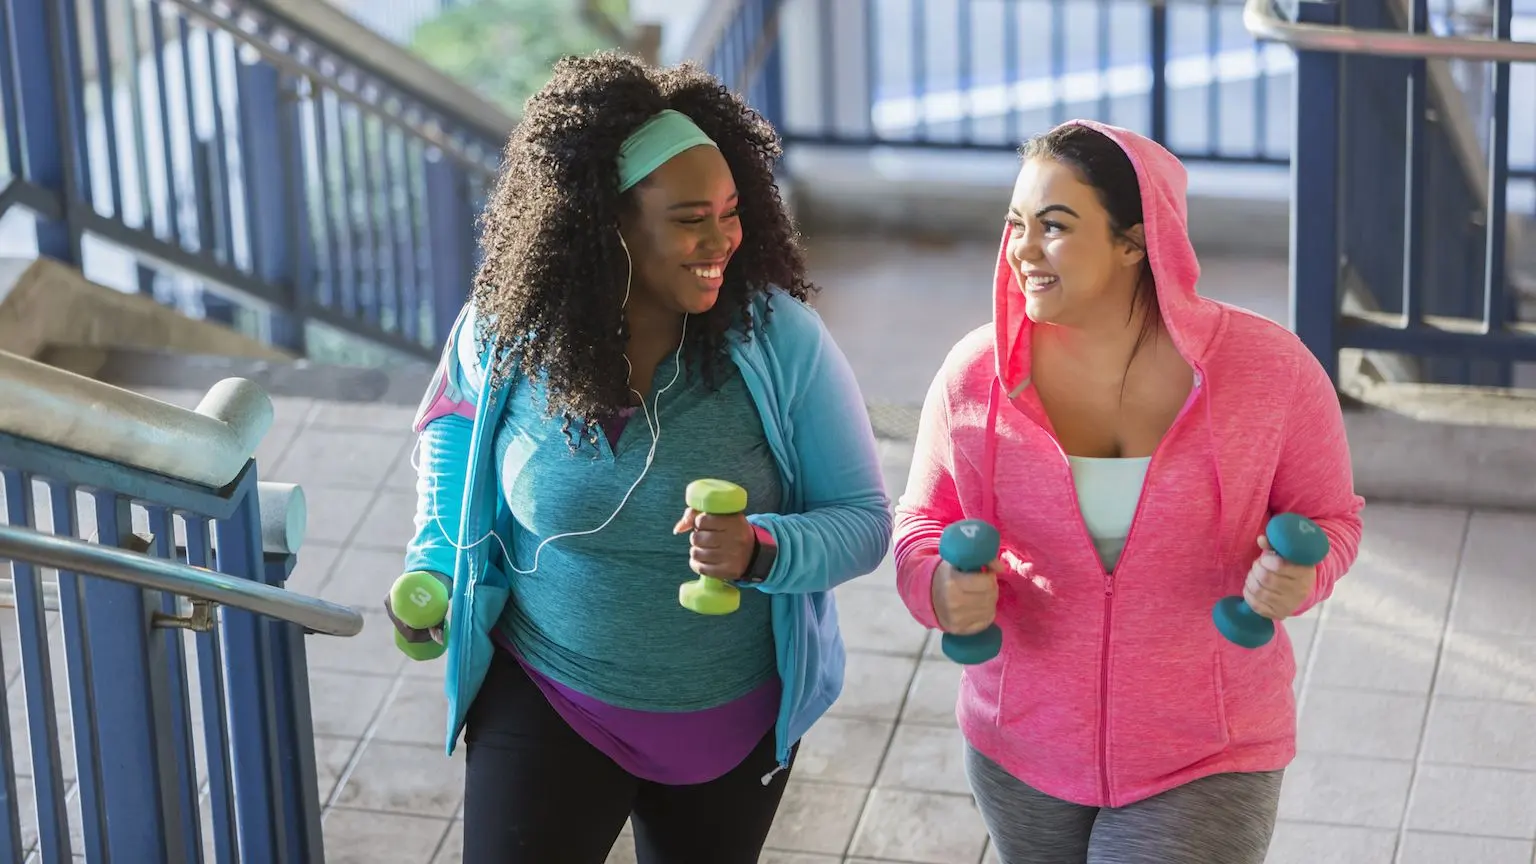 Two women exercising together in bright clothing